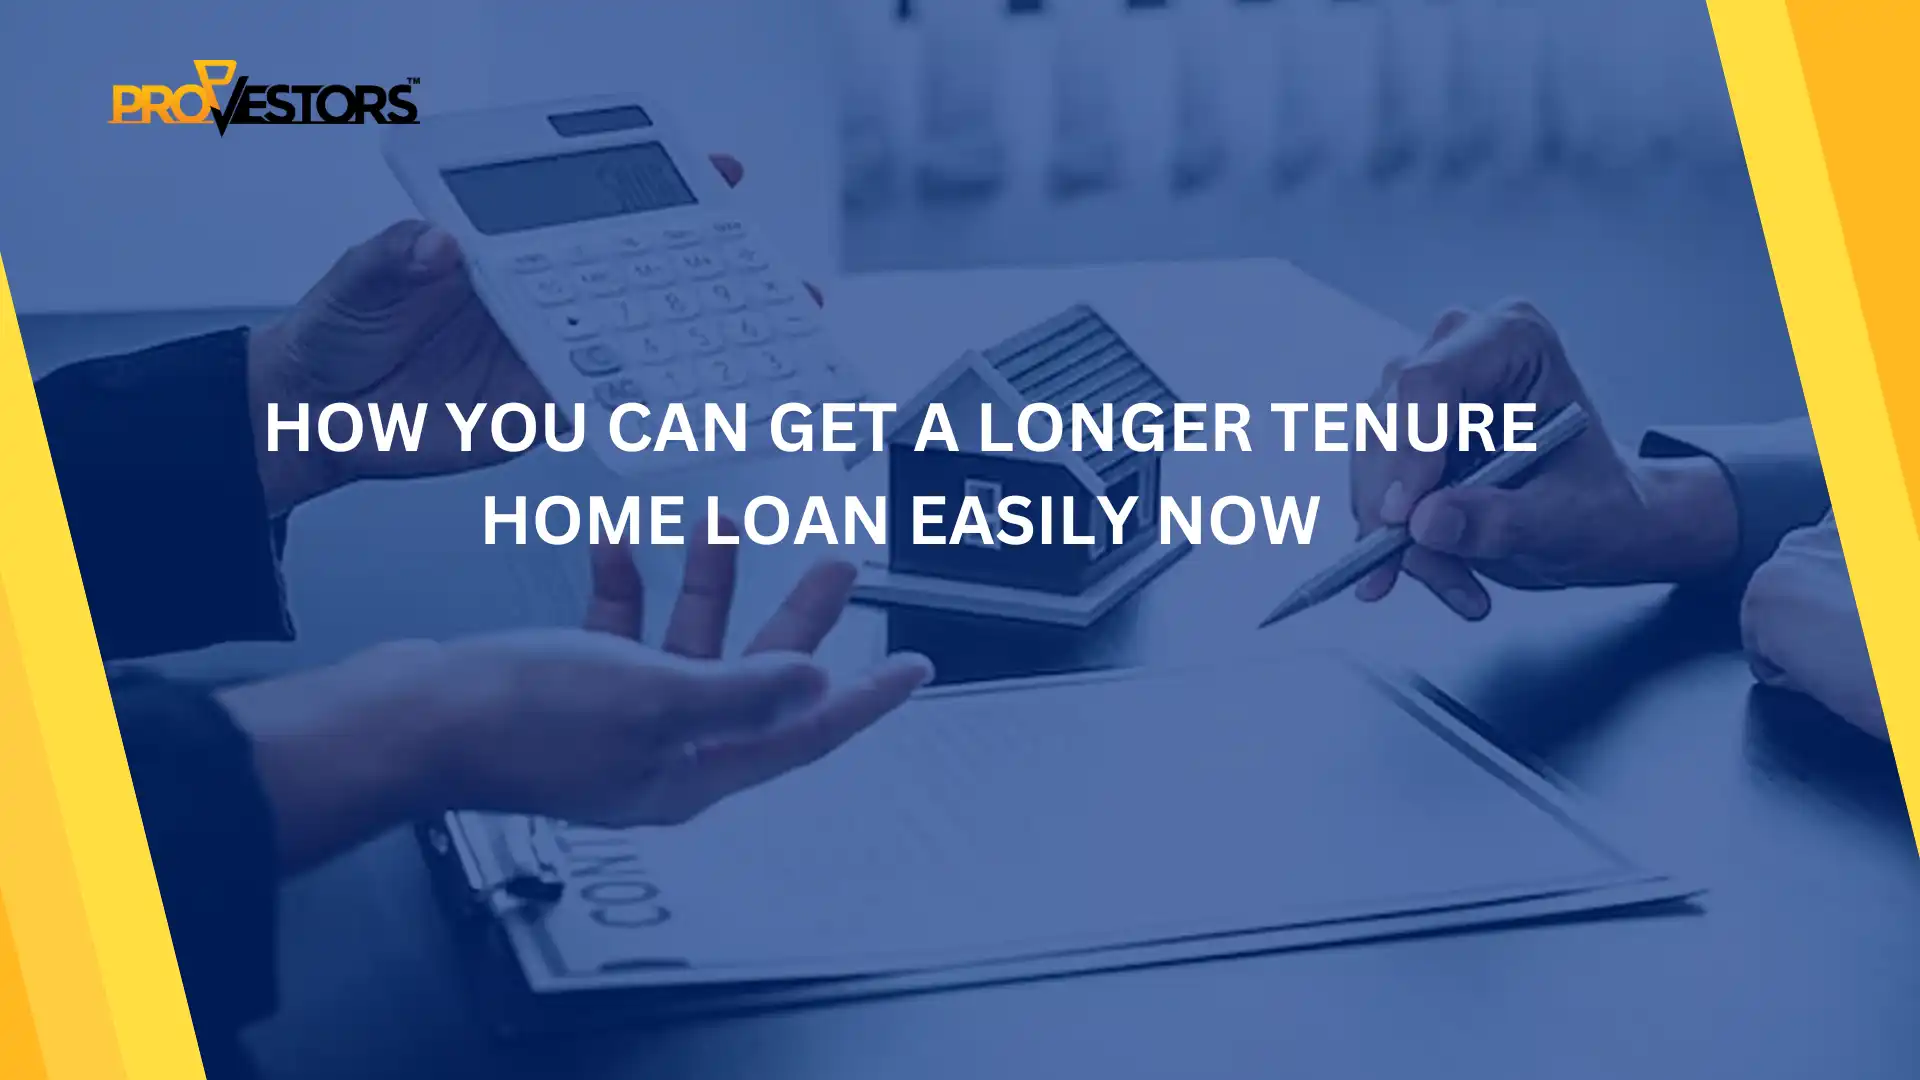 Advantages of Opting for a Home Loan with a Longer Tenure